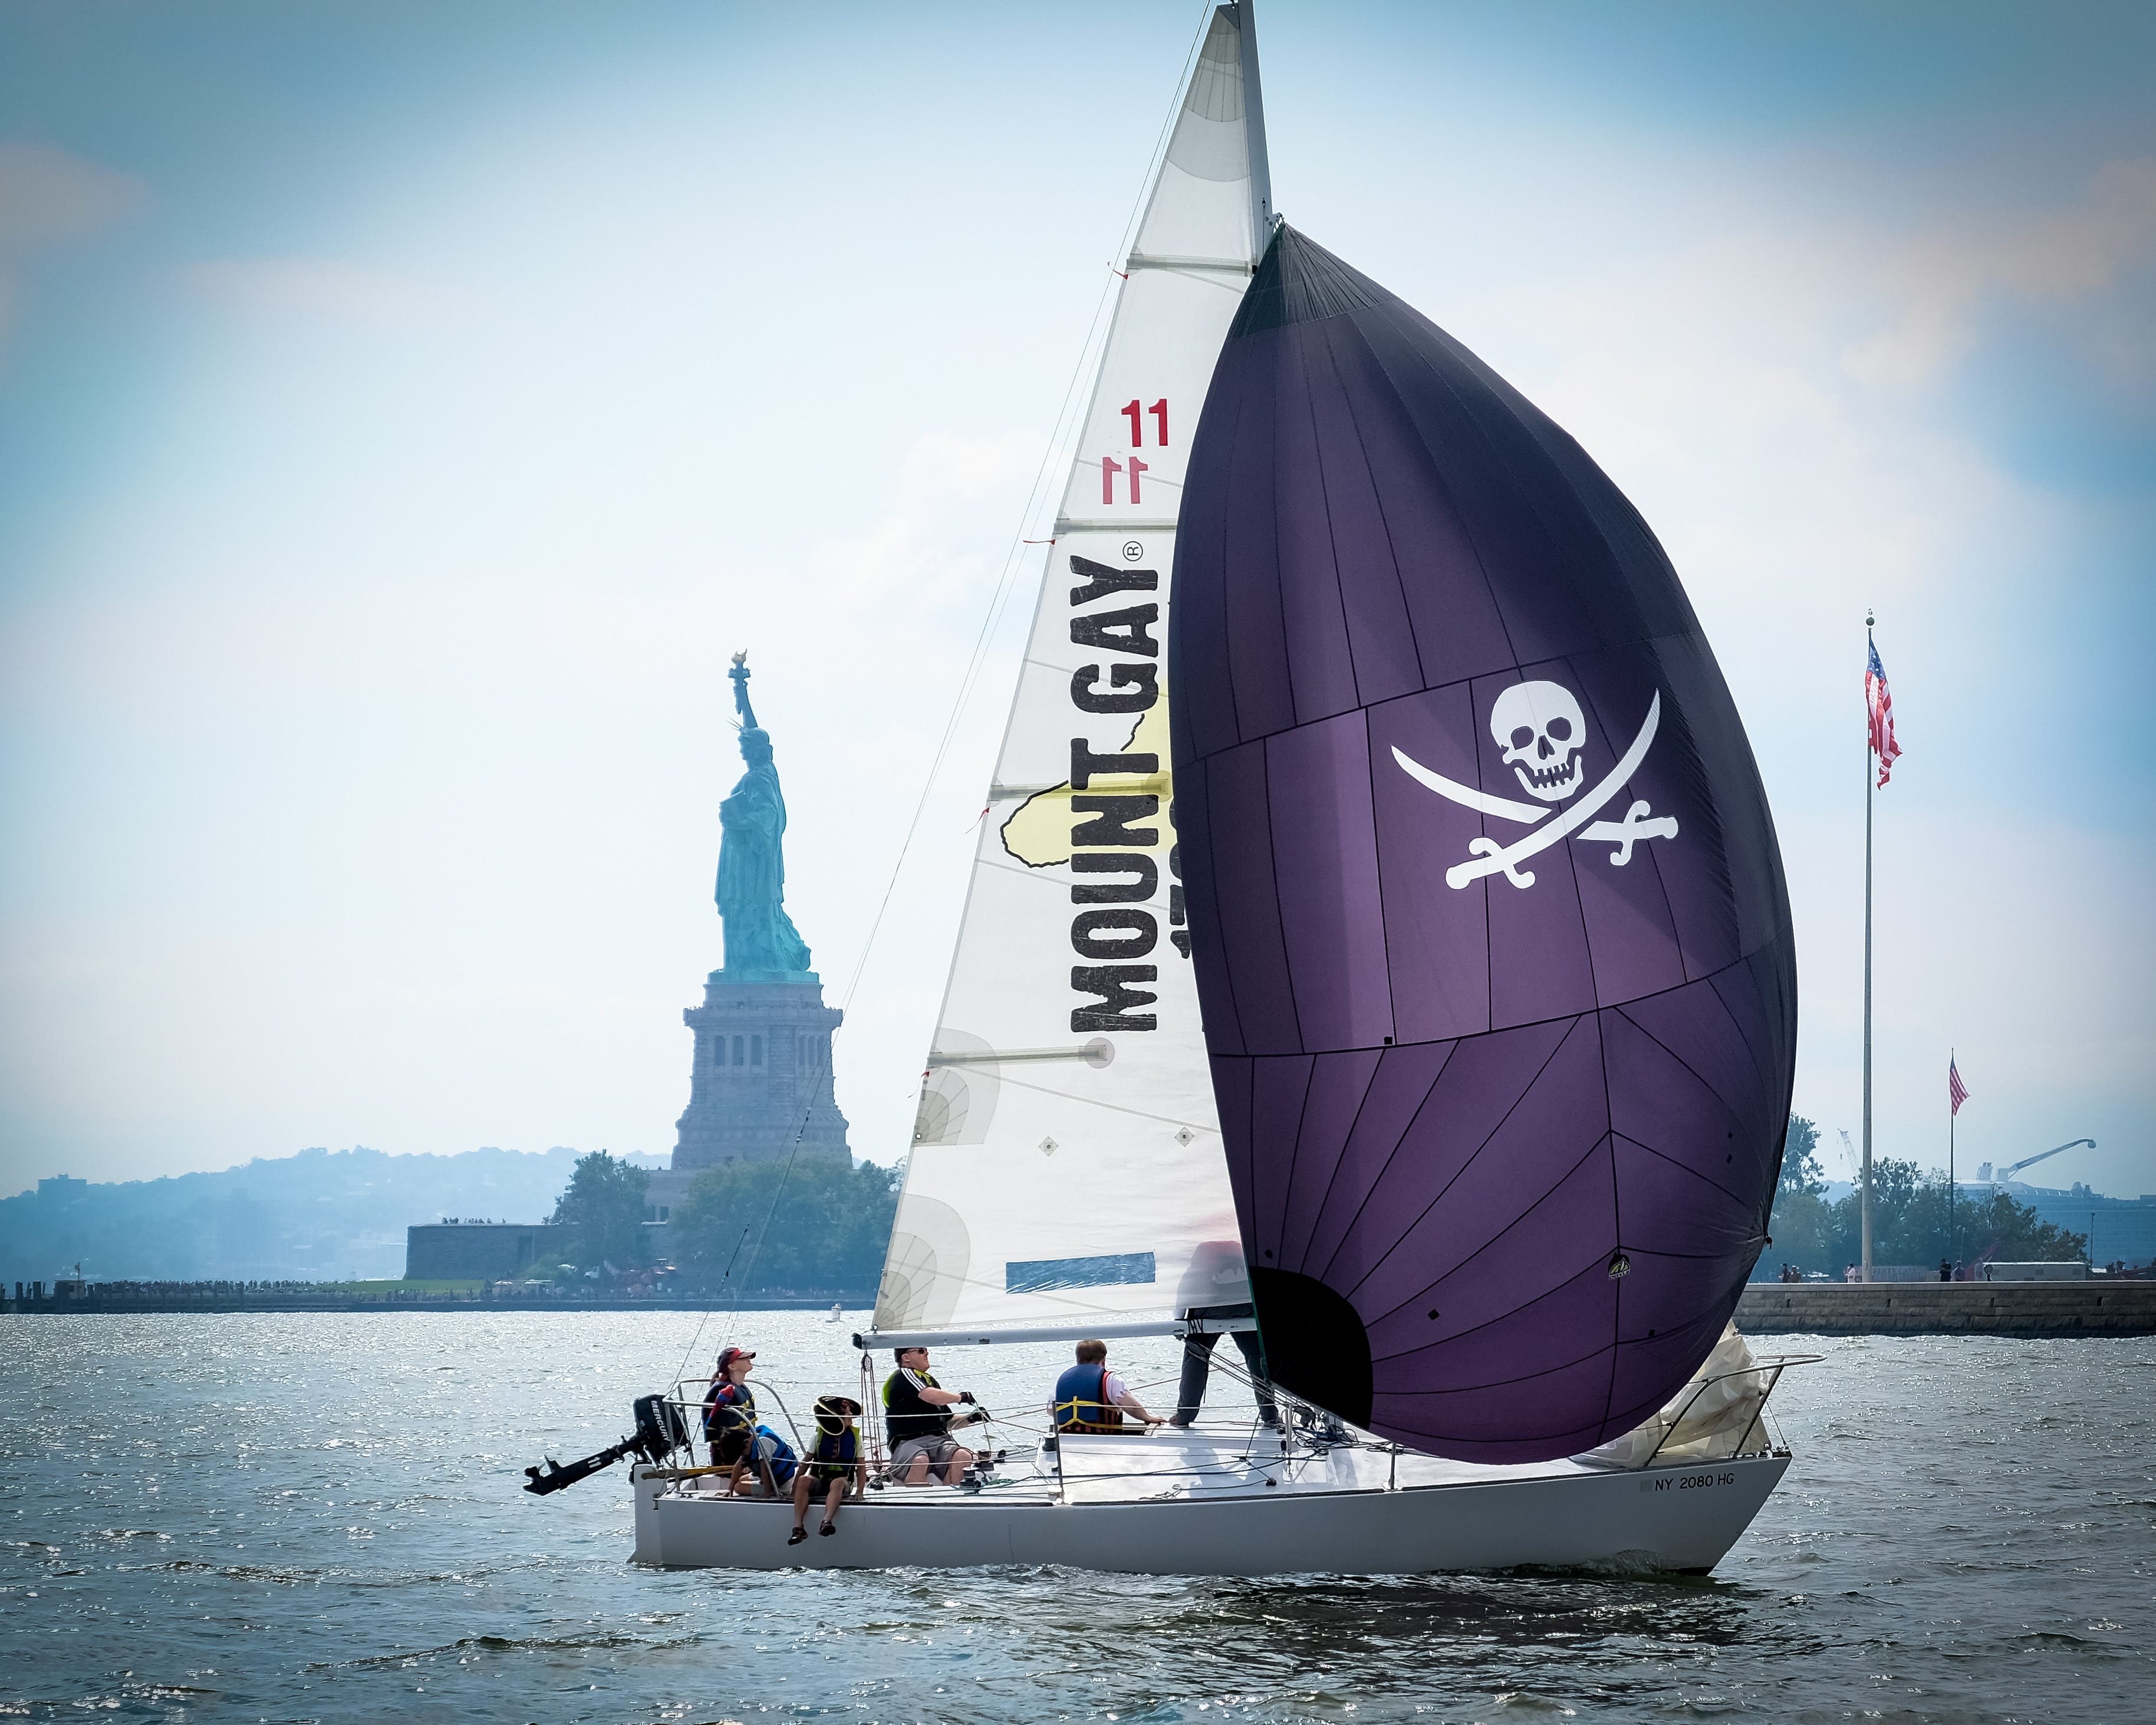 Pirate Sail takes the Hudson | 12° West